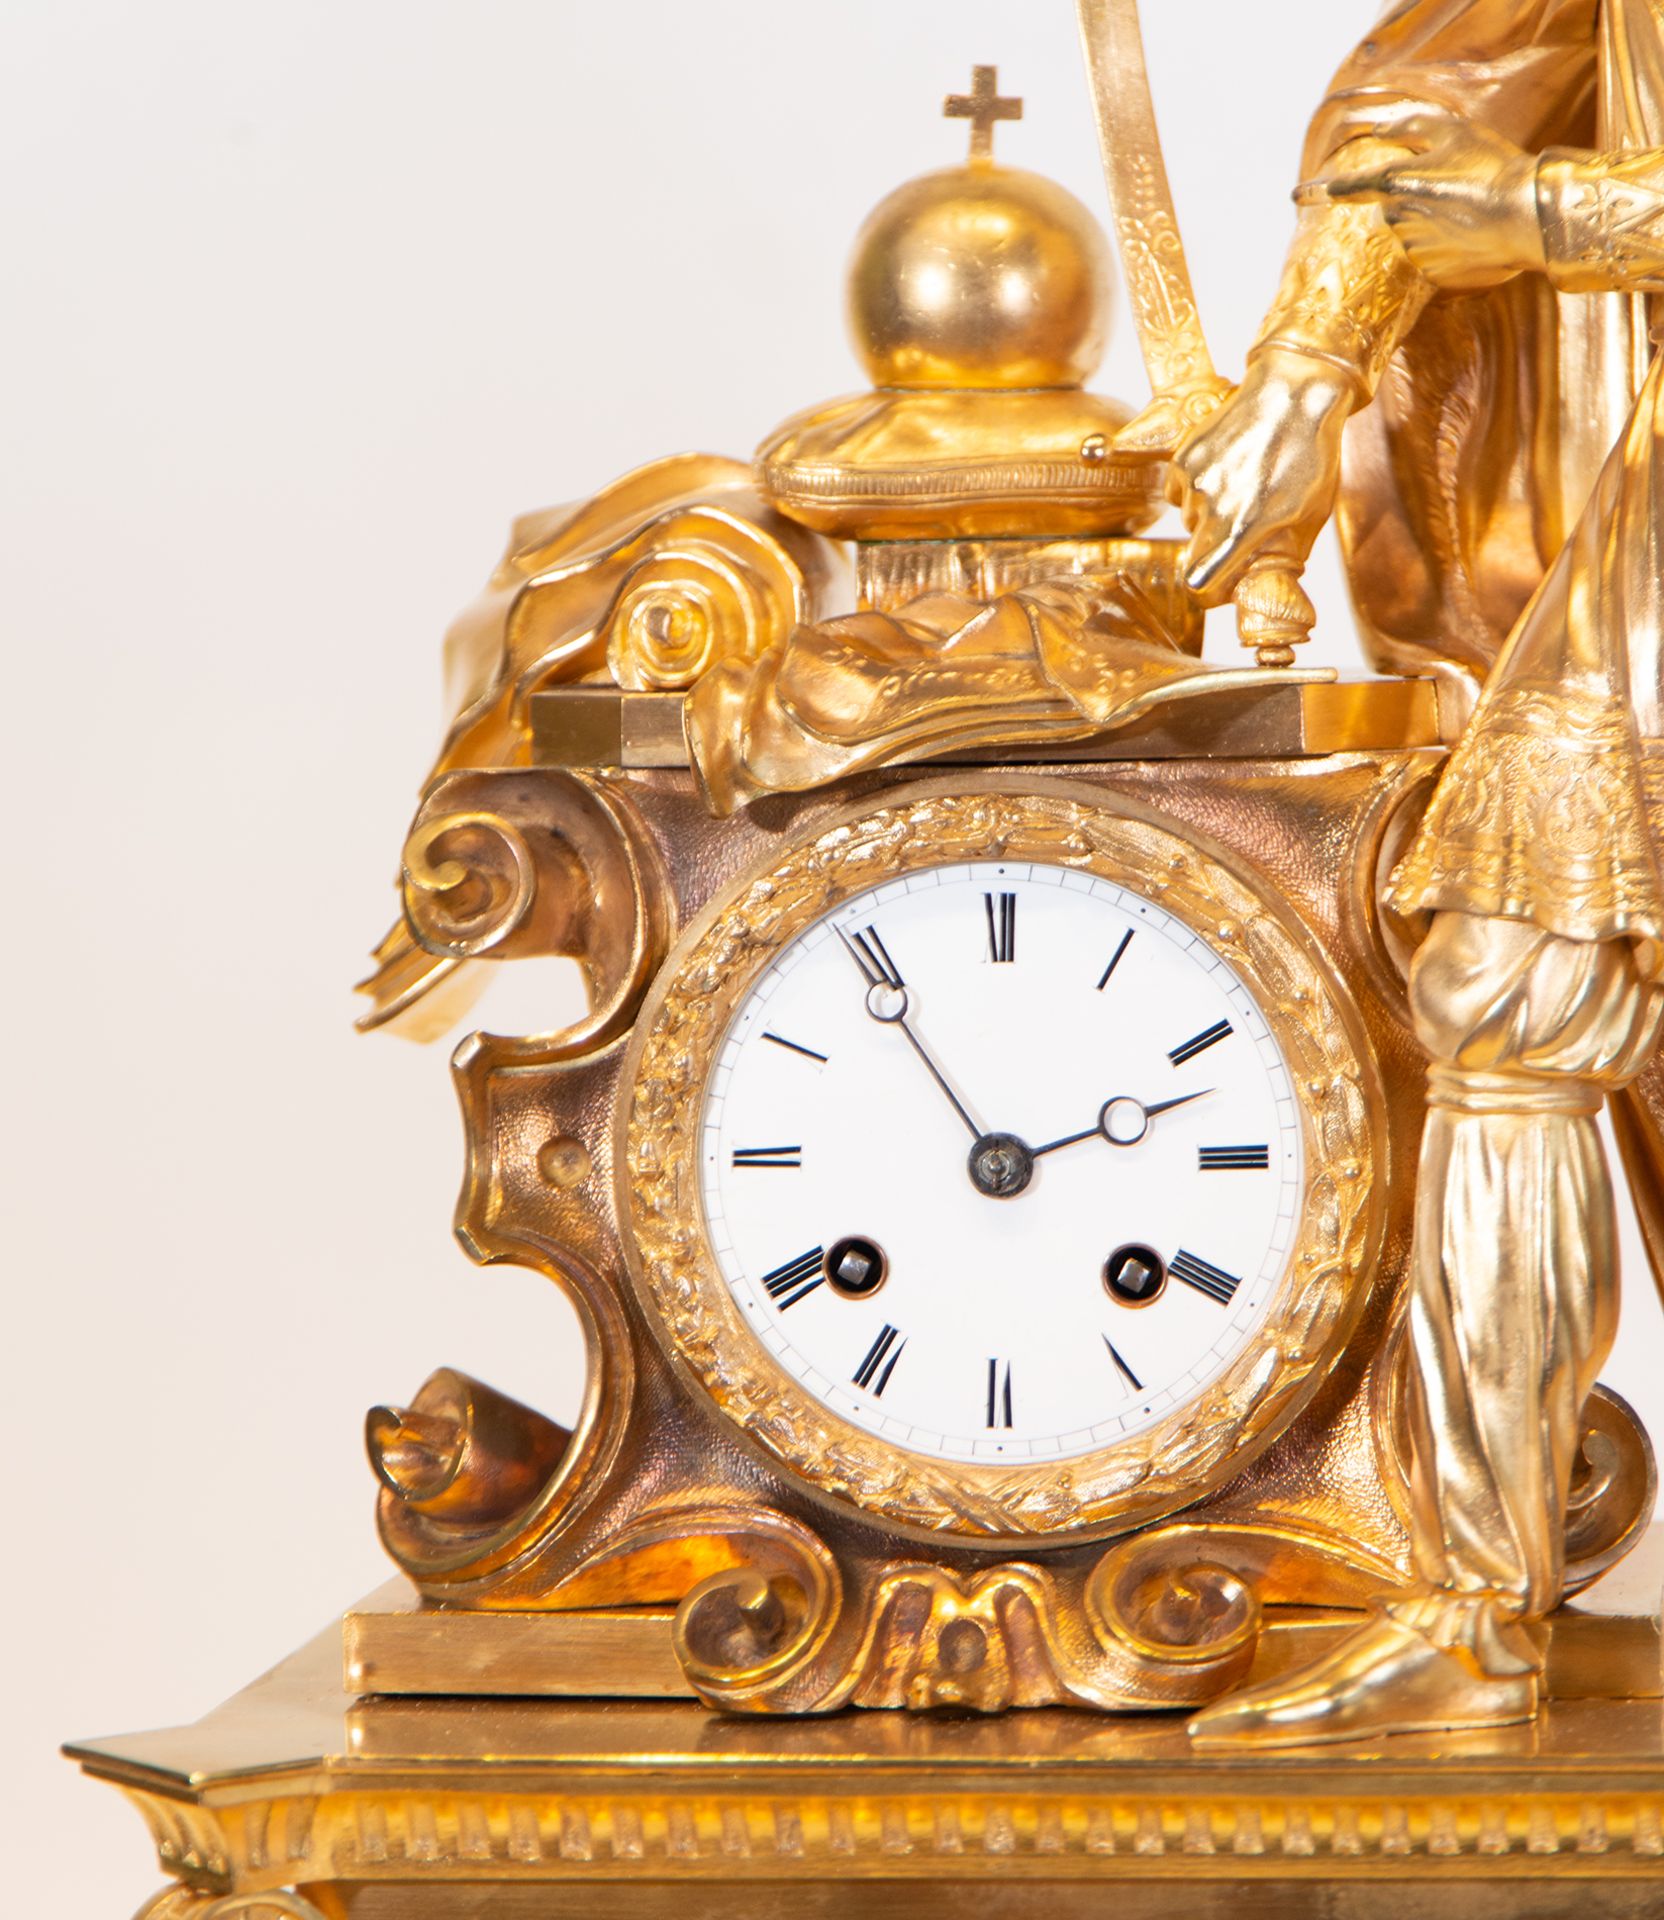 Gilt bronze clock depicting the Emperor Charlemagne, 19th century French school - Image 4 of 8